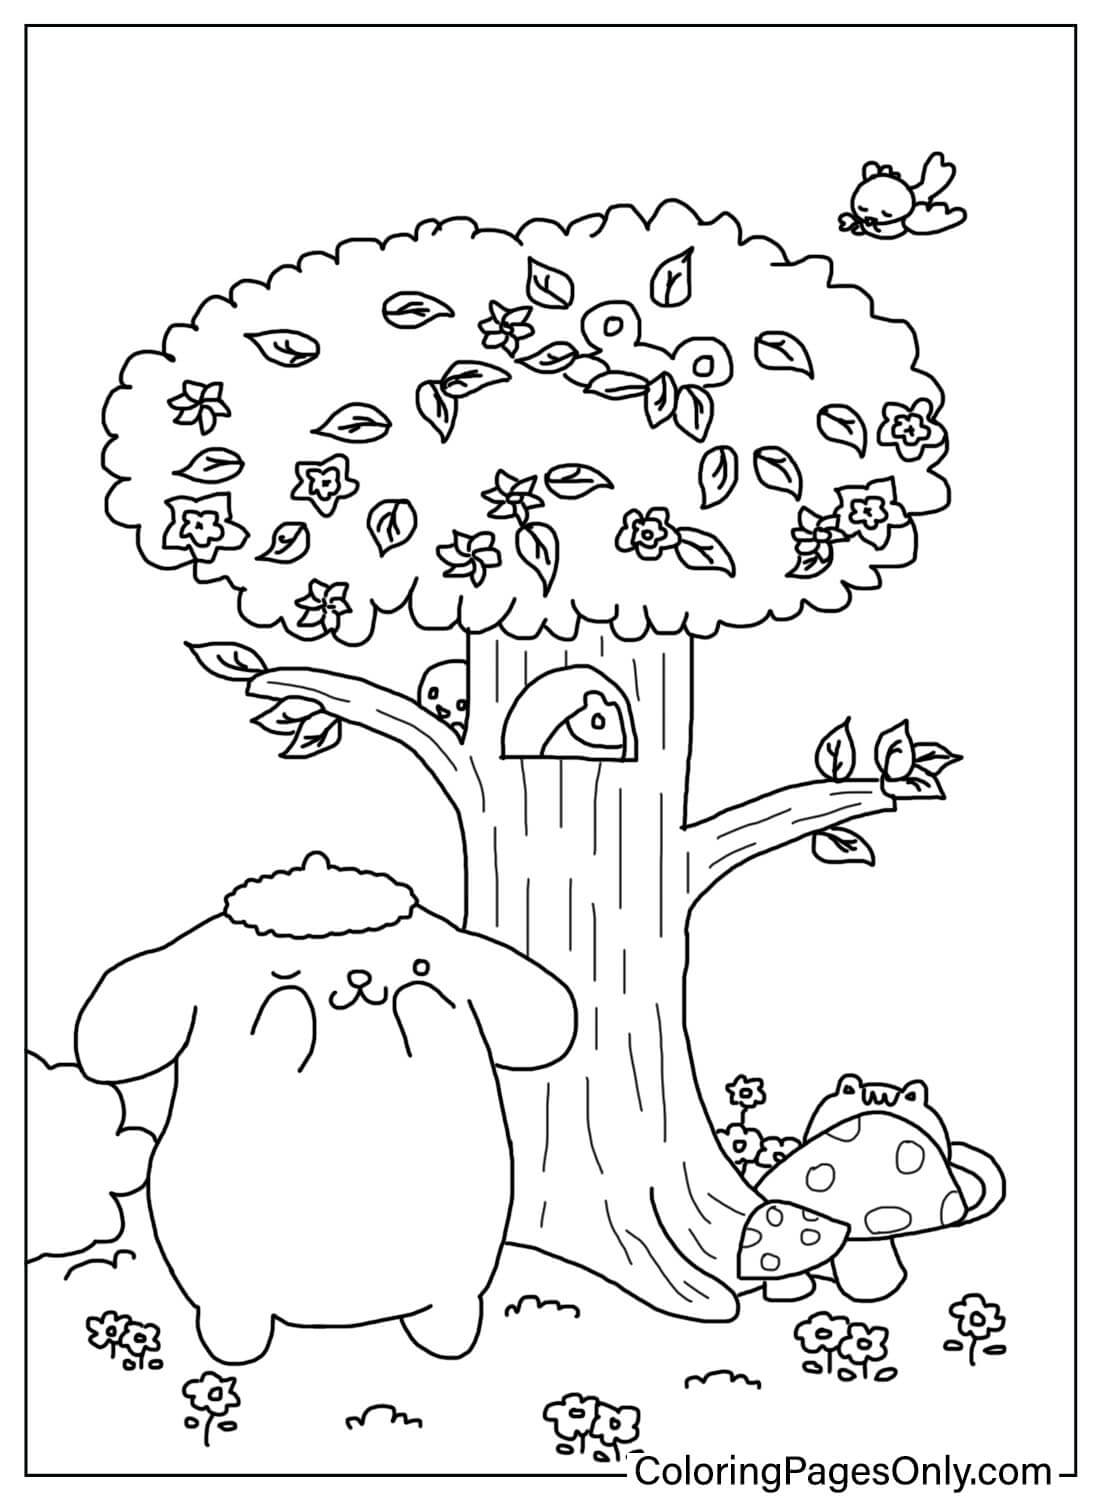 Pompompurin Coloring Page for Kids